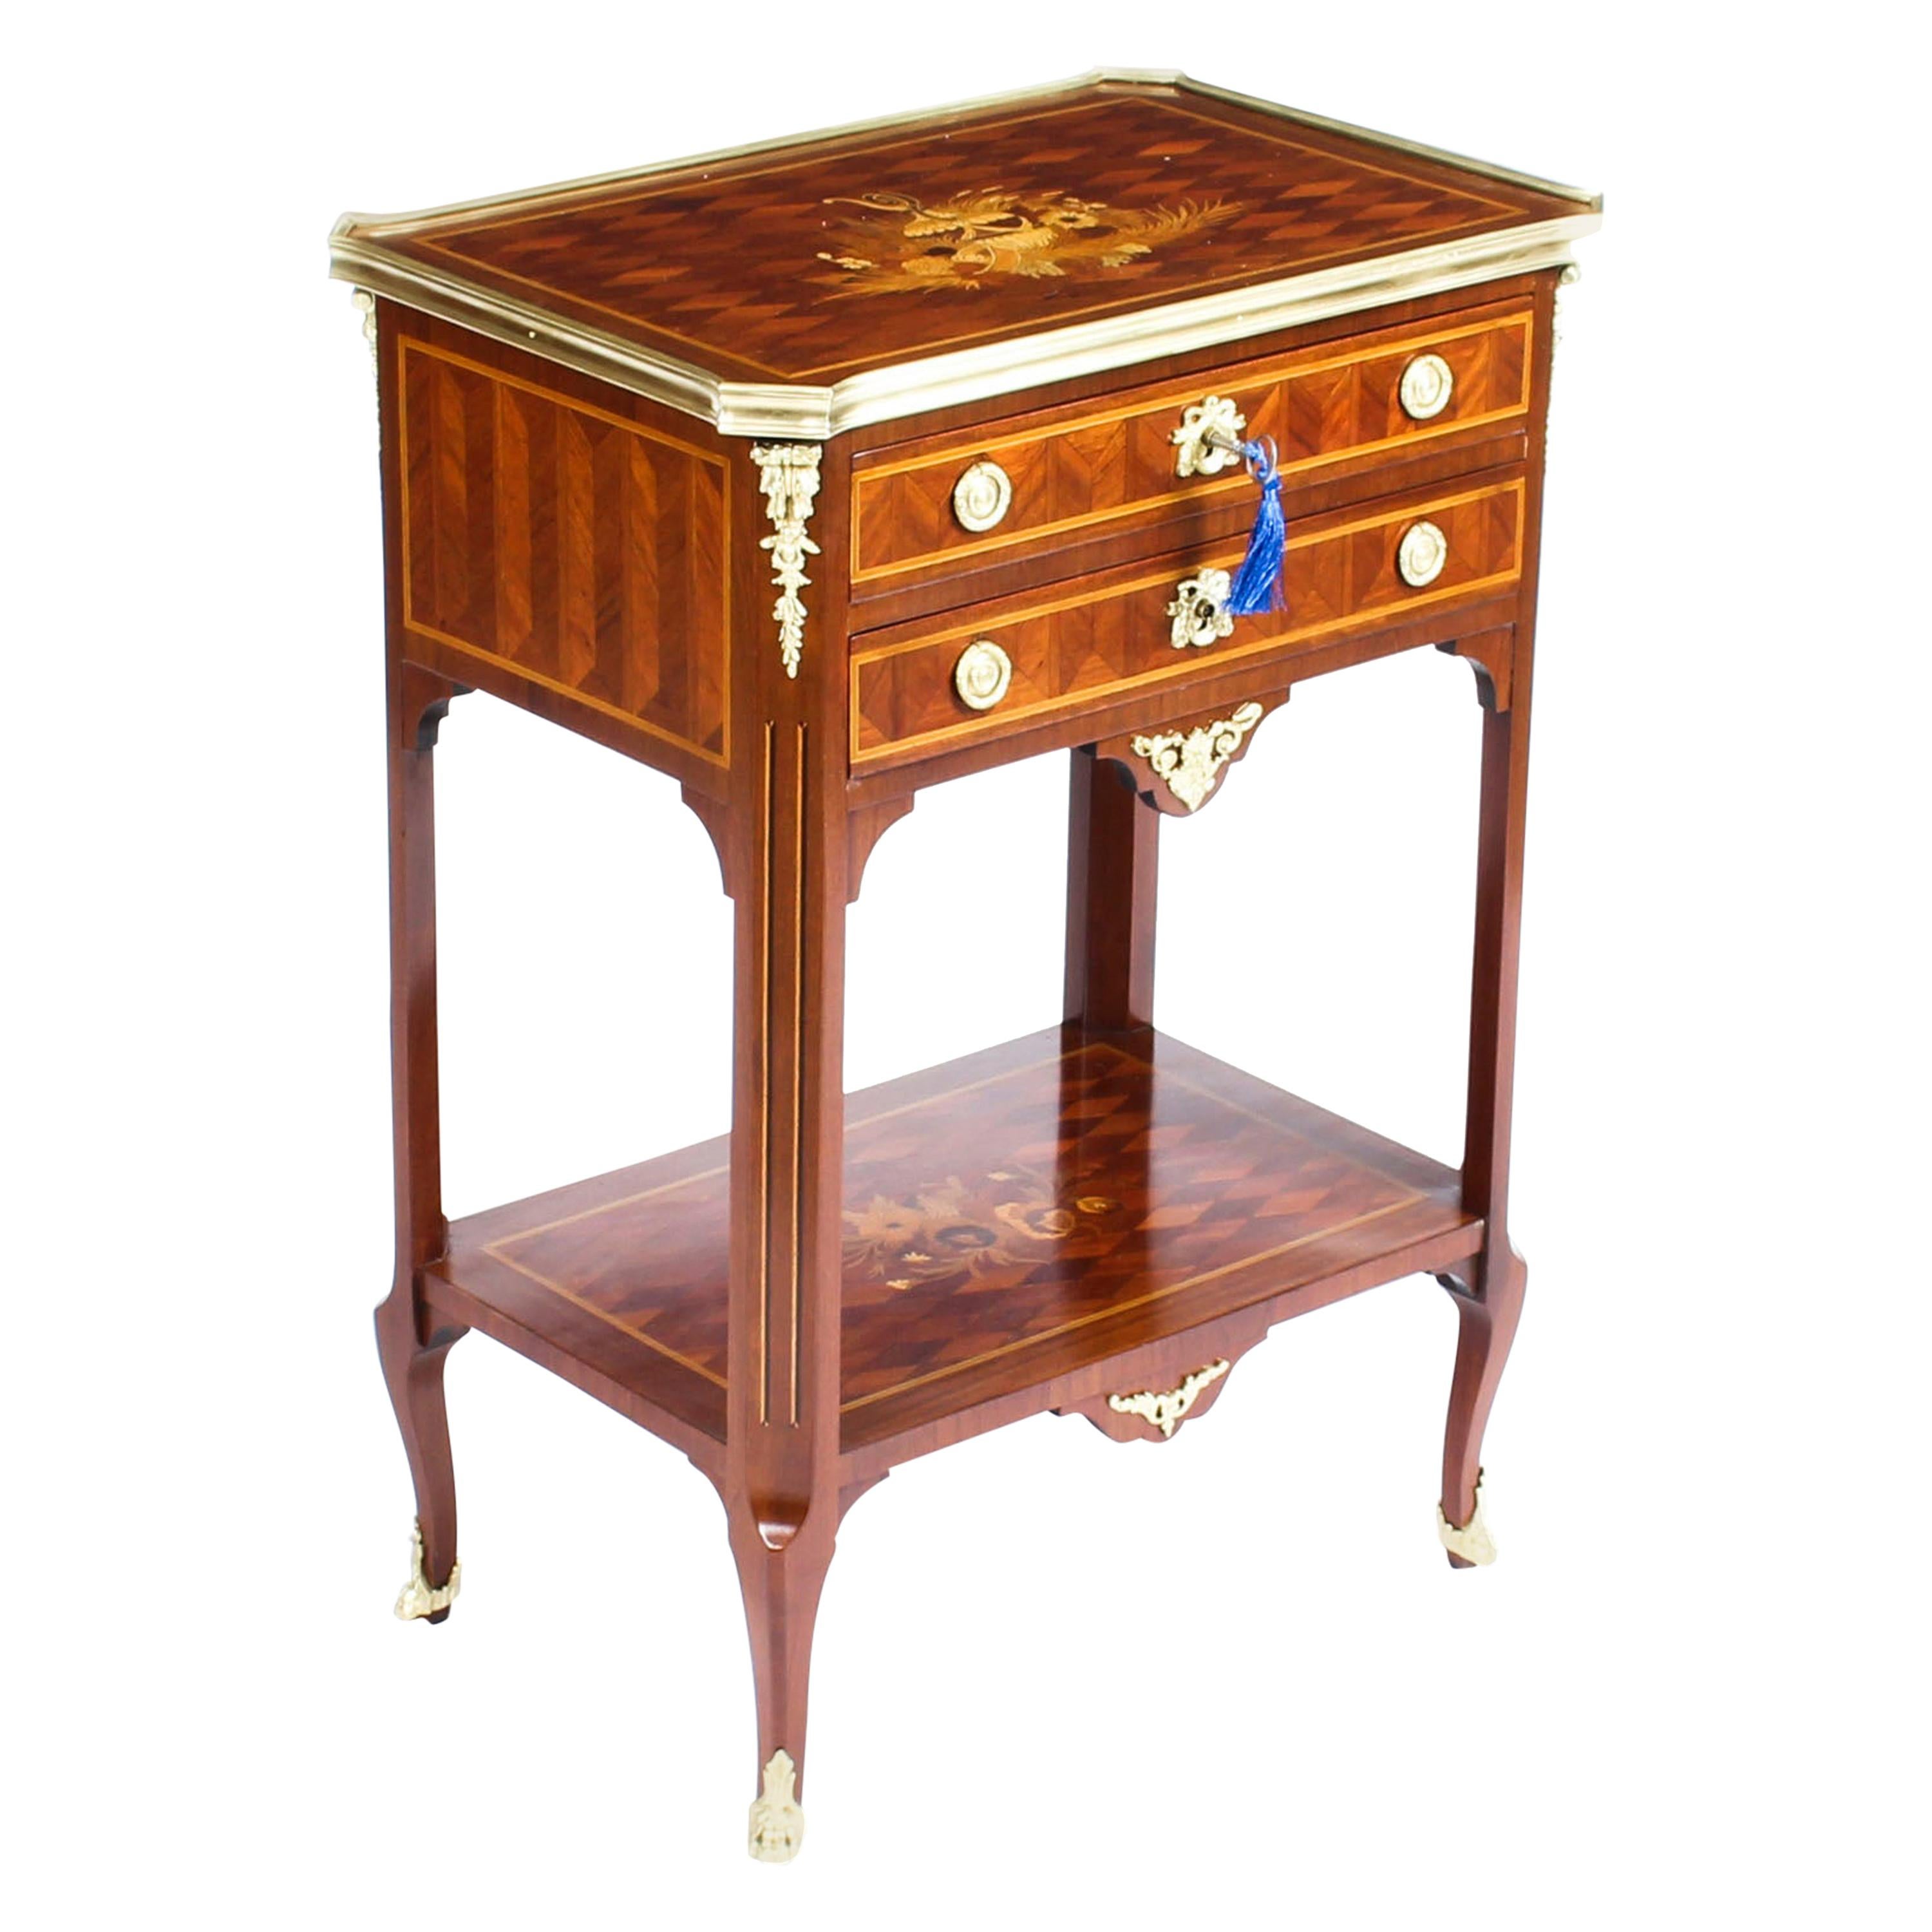 French Parquetry and Marquetry Table En Chiffonière Work Table, 19th Century